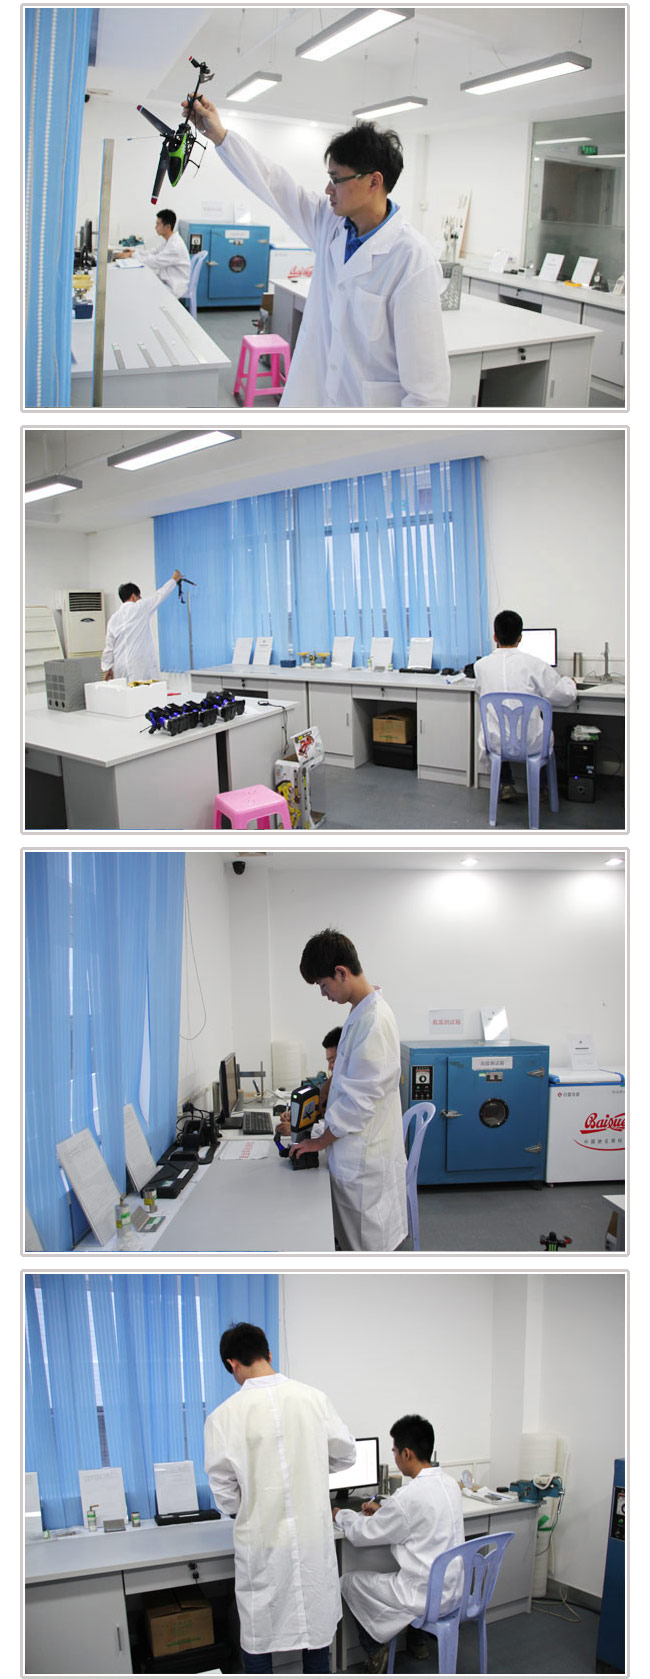 Product Inspection room